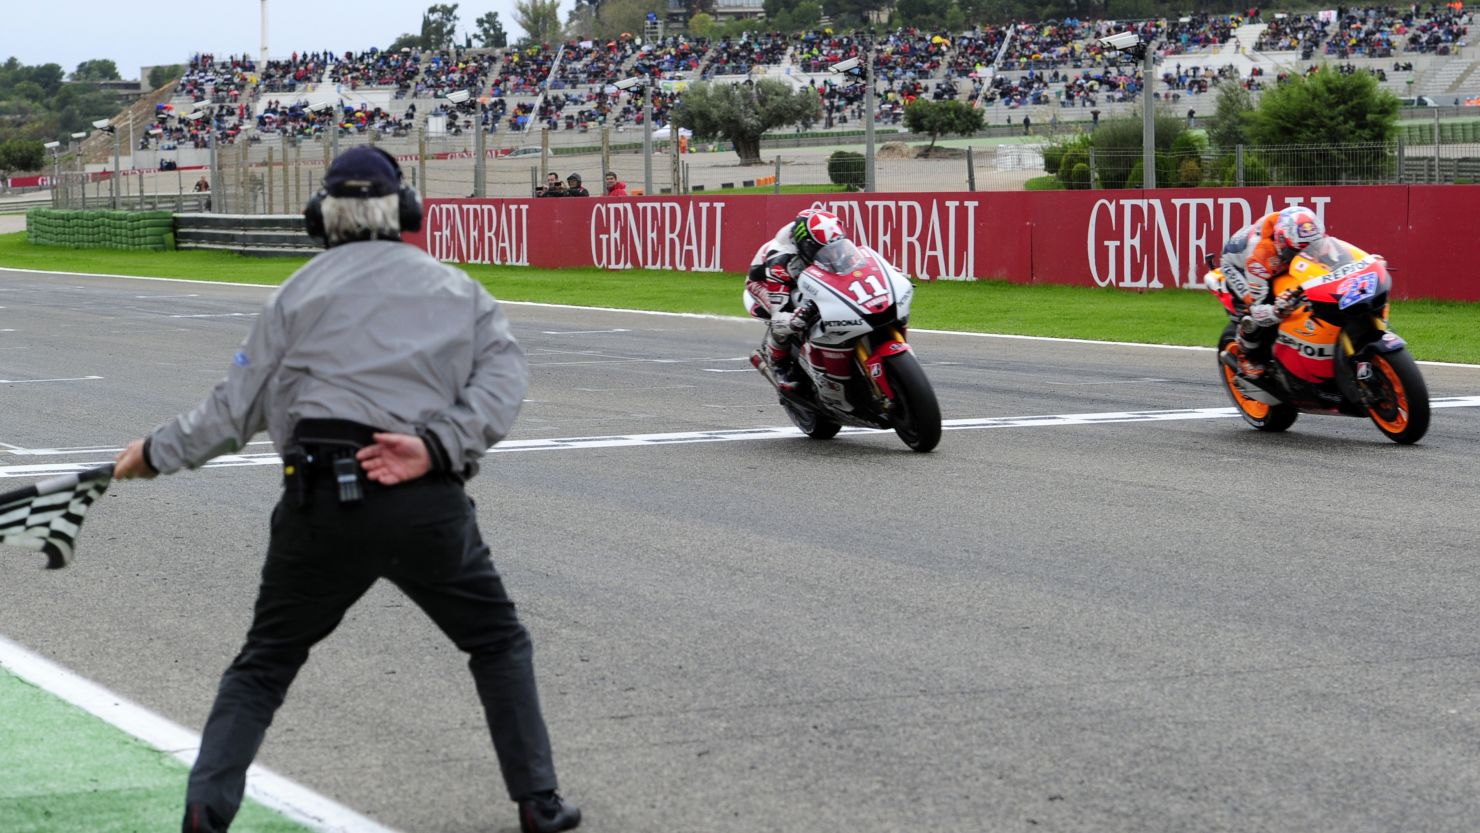 World champion Casey Stoner (right) edges Ben Spies in a thrilling finish to the Valencia MotoGP